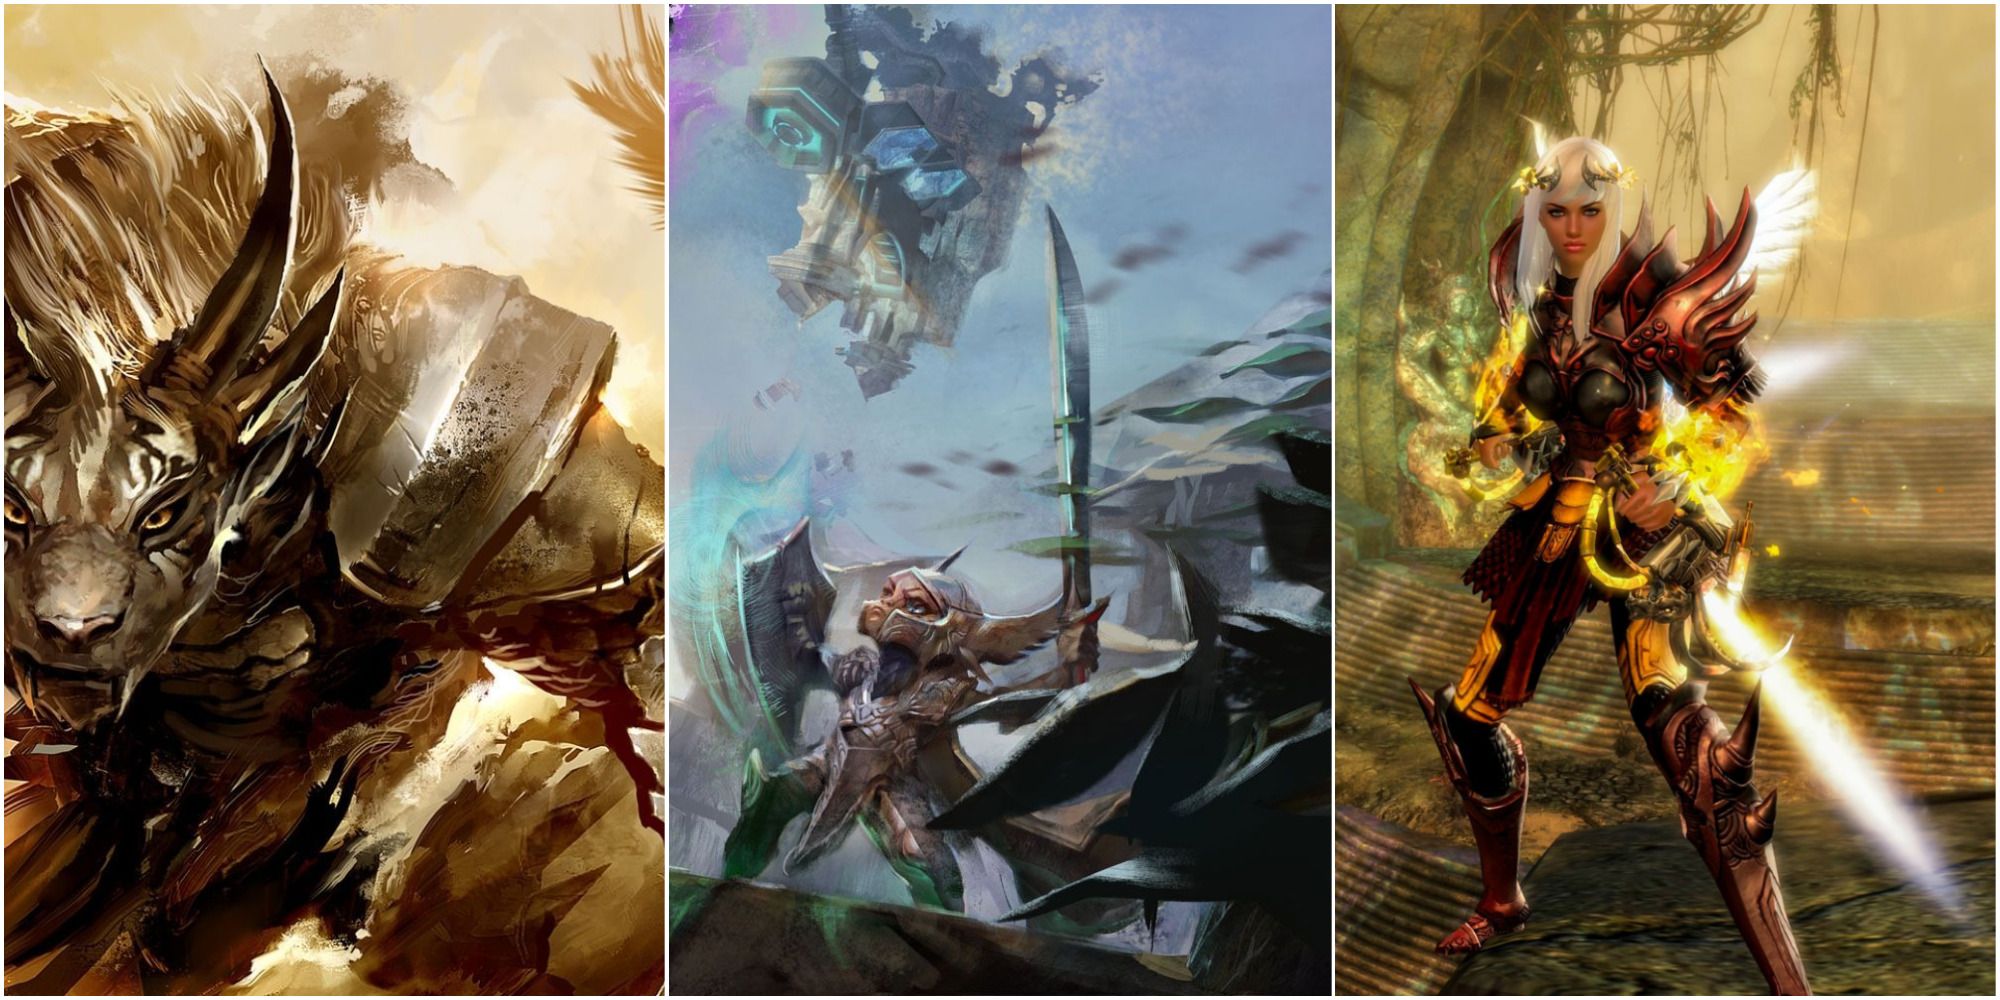 A Guild Wars 2 Feature Image showing some Charr Warrior Concept art, an Asuran Warrior challenging an Elementalist and A human Warrior in Orr